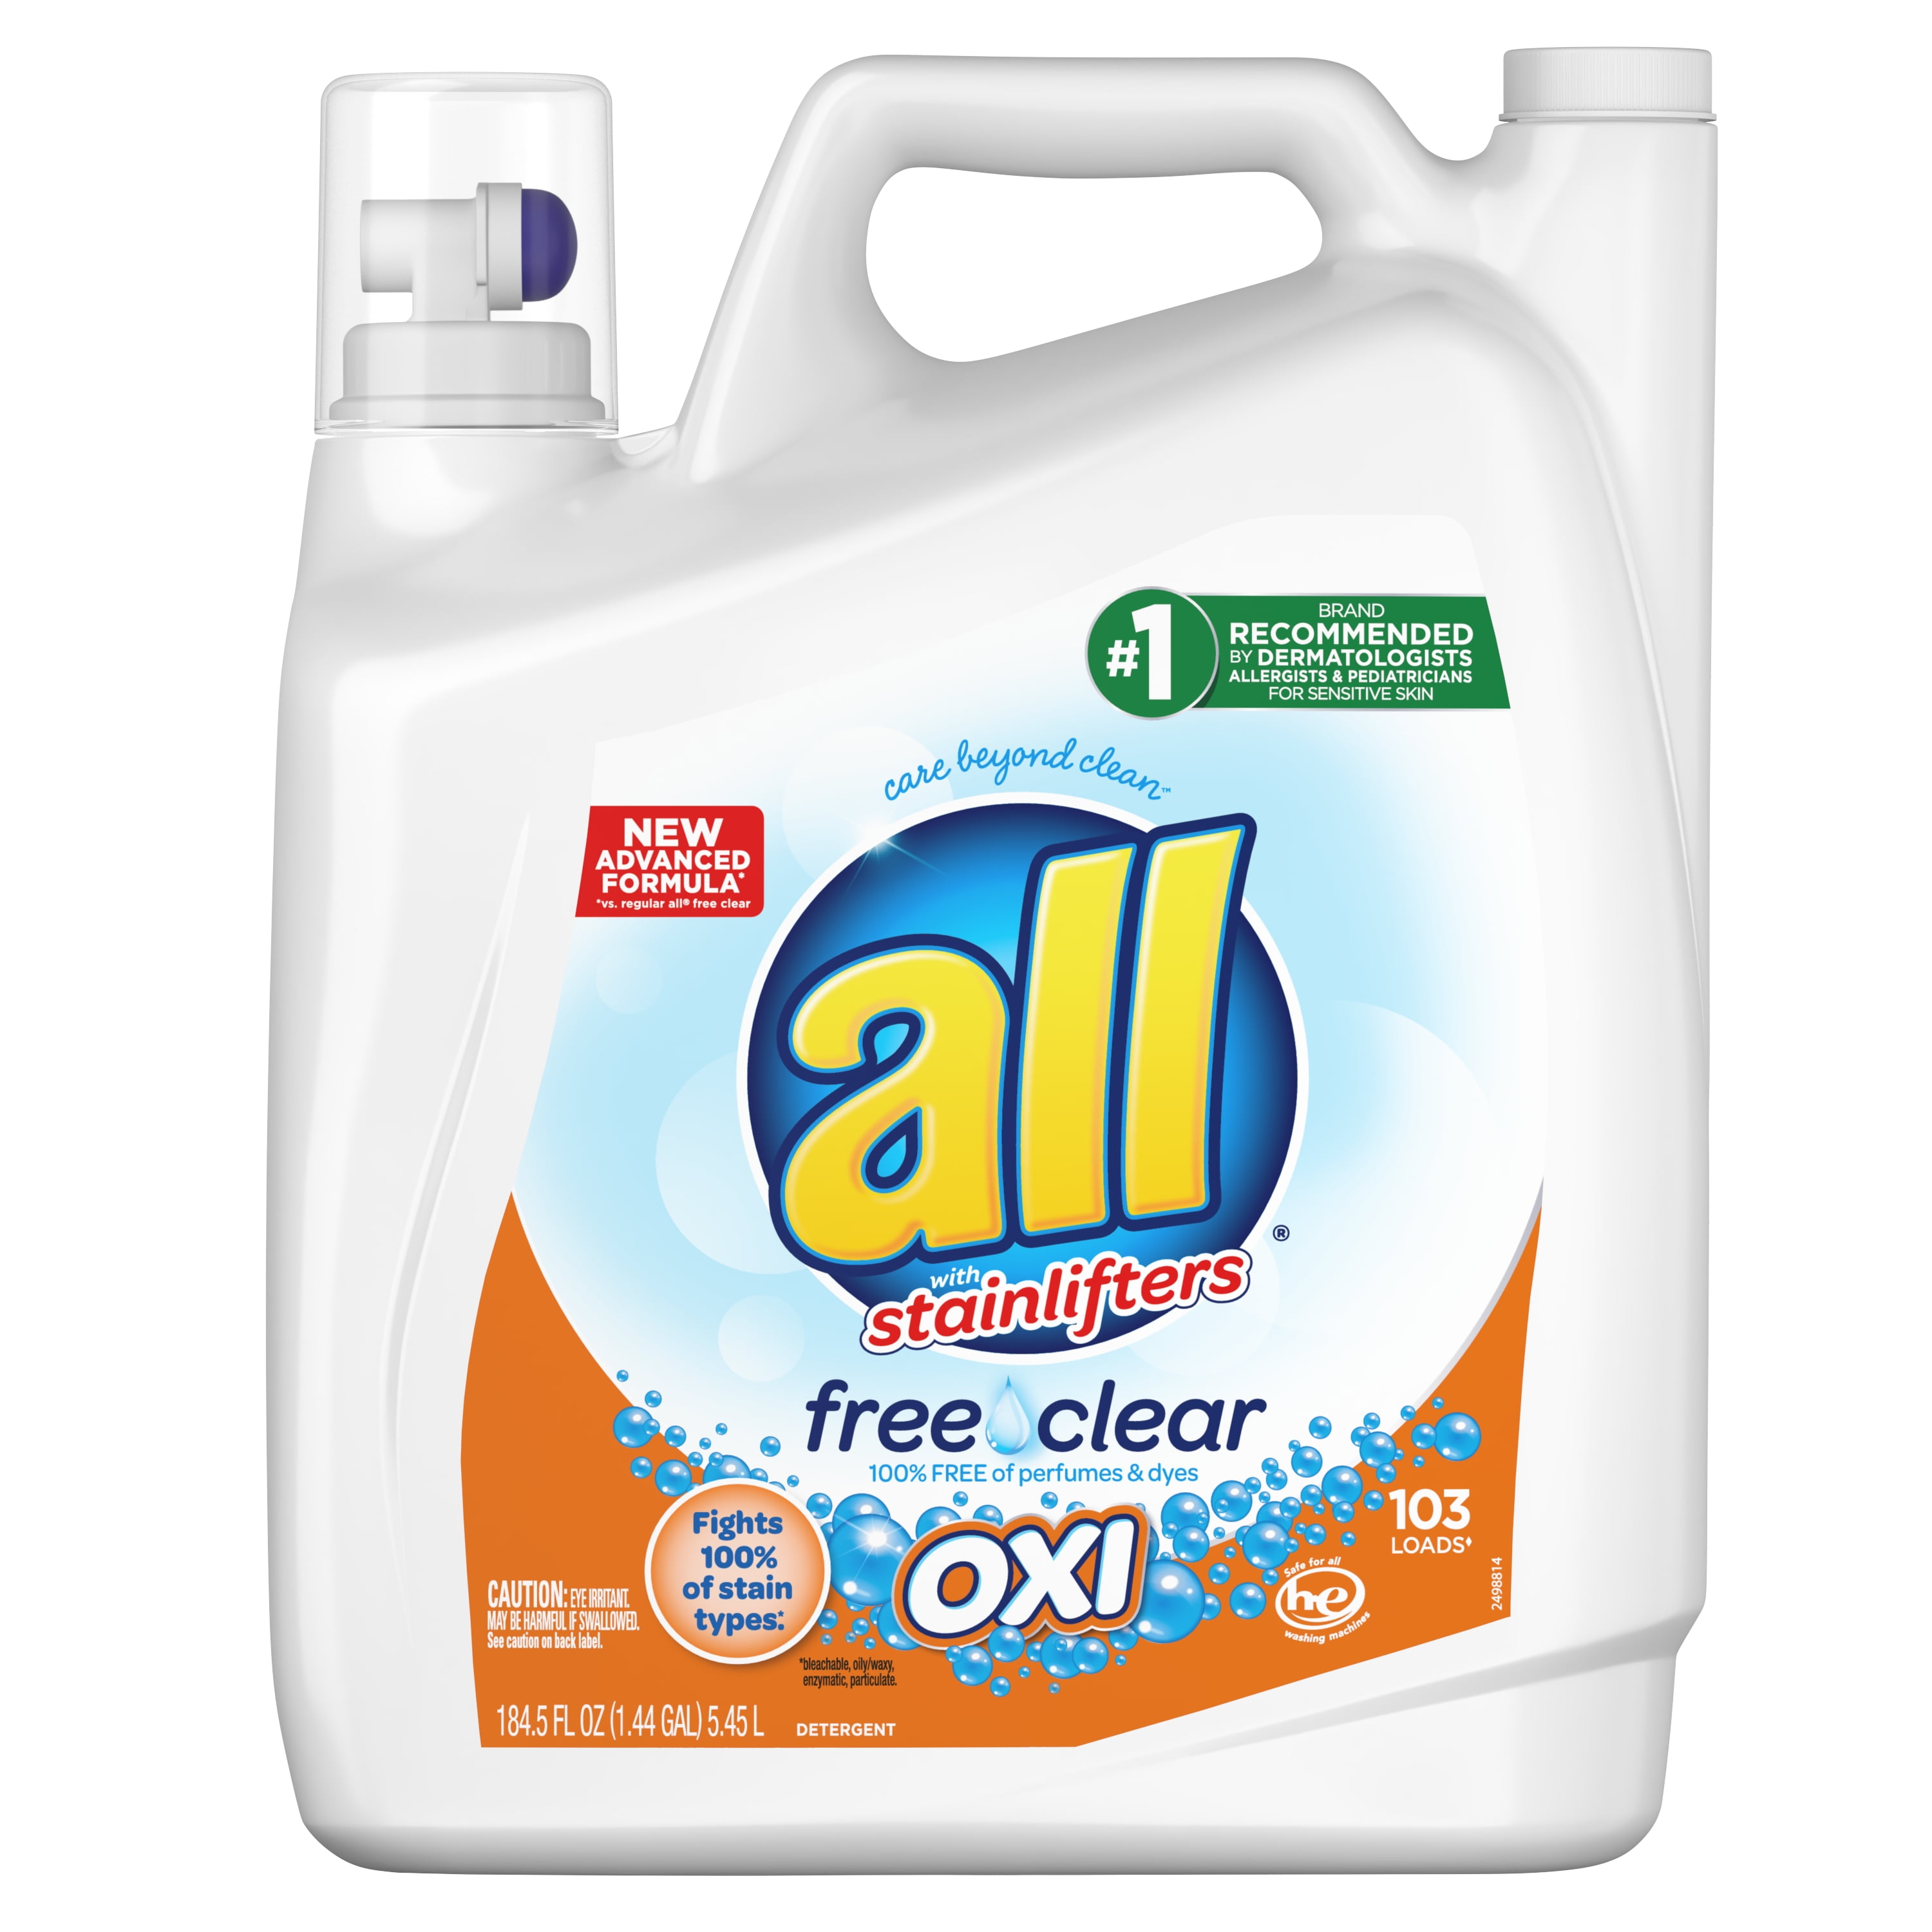 all-free-clear-oxi-for-sensitive-skin-liquid-laundry-detergent-184-5